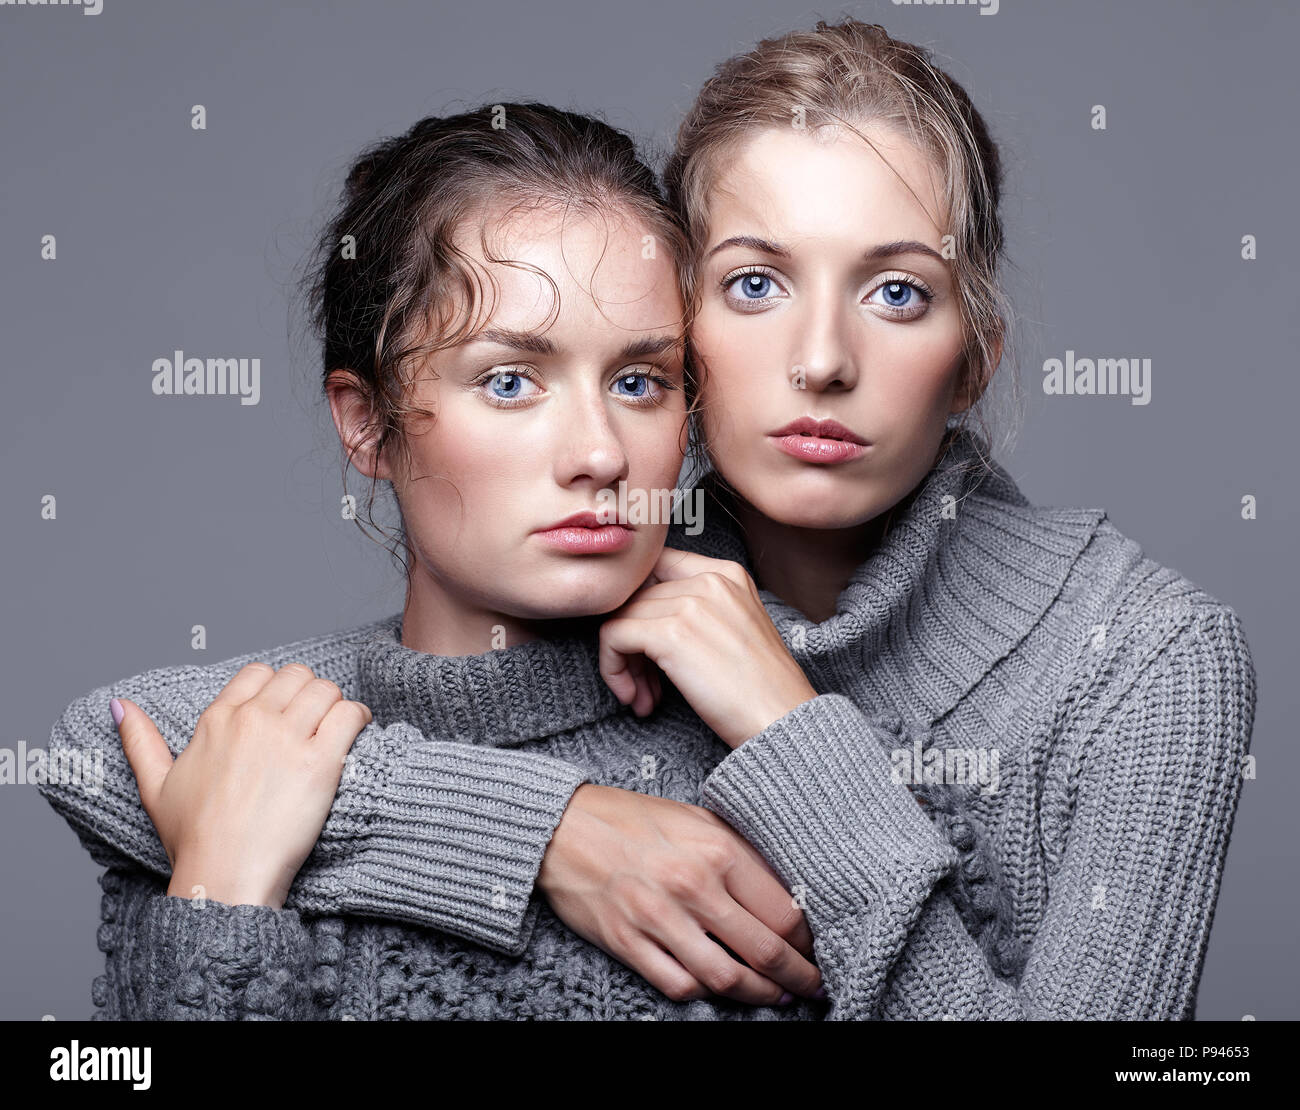 Two young women in gray sweaters on grey studio background. Beautiful girls stretching hands forward in embrace. Female friendship concept. Stock Photo